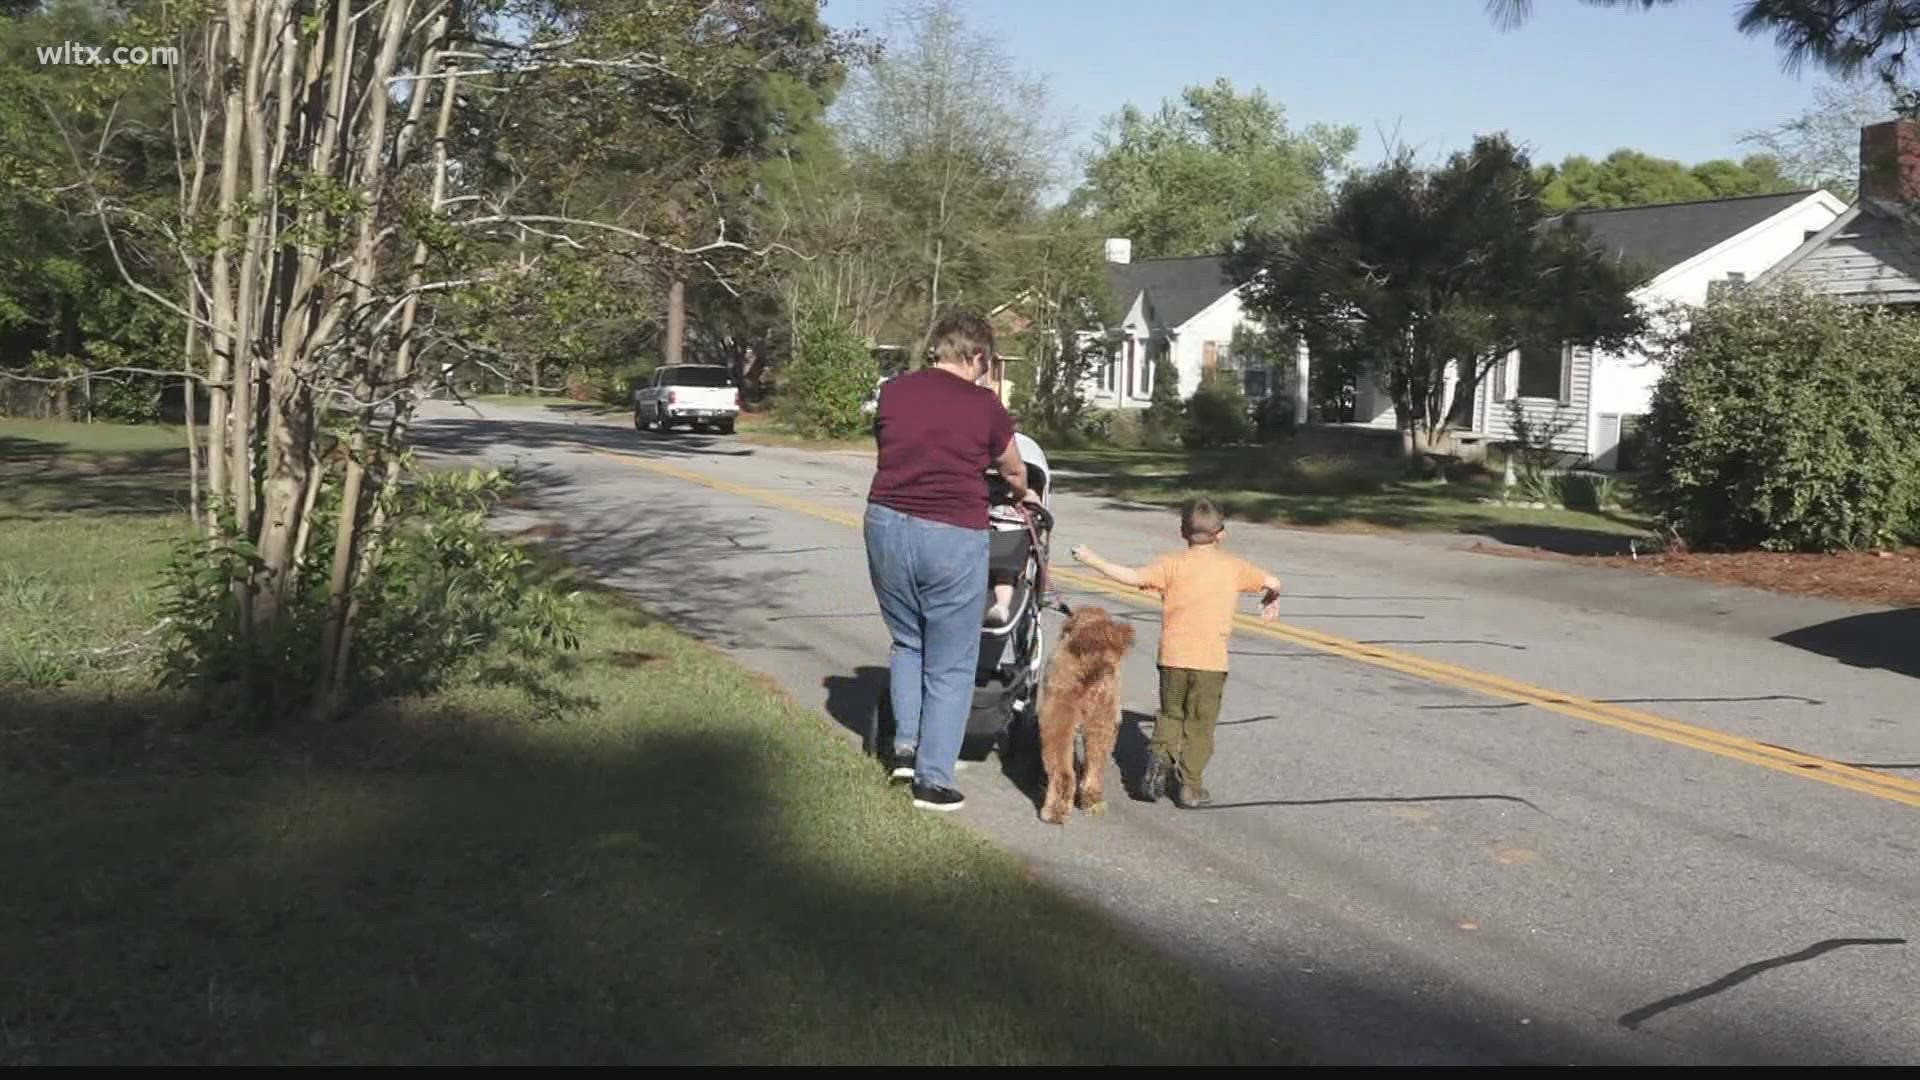 After two months of working with Cayce City officials, law enforcement, and SCDOT, Cayce Avenues are getting the safer neighborhood they have been working toward.